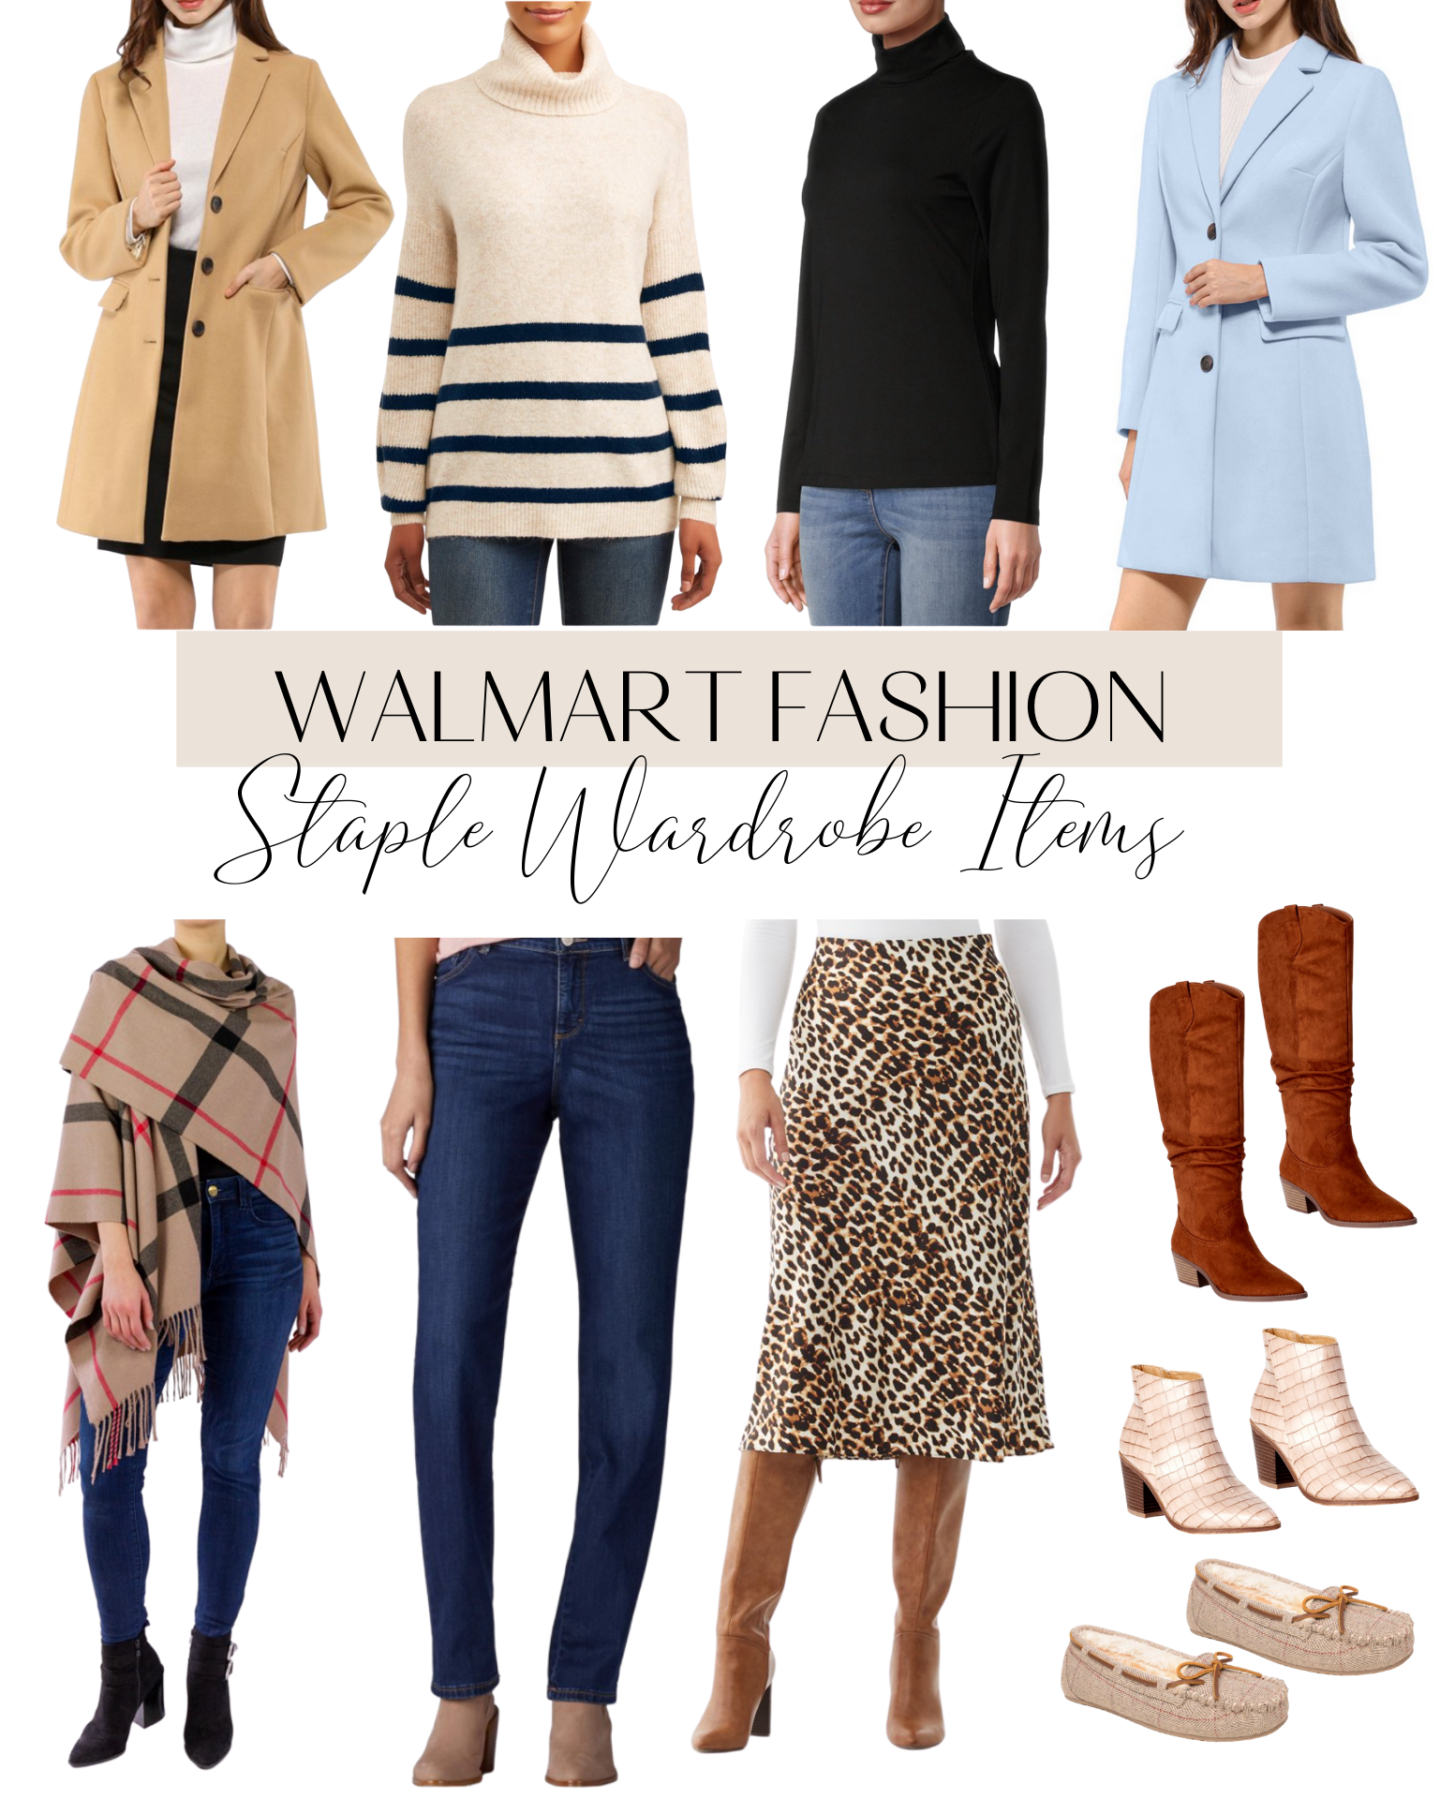 10 Best Closet Staples For Your Wardrobe from Walmart Fashion